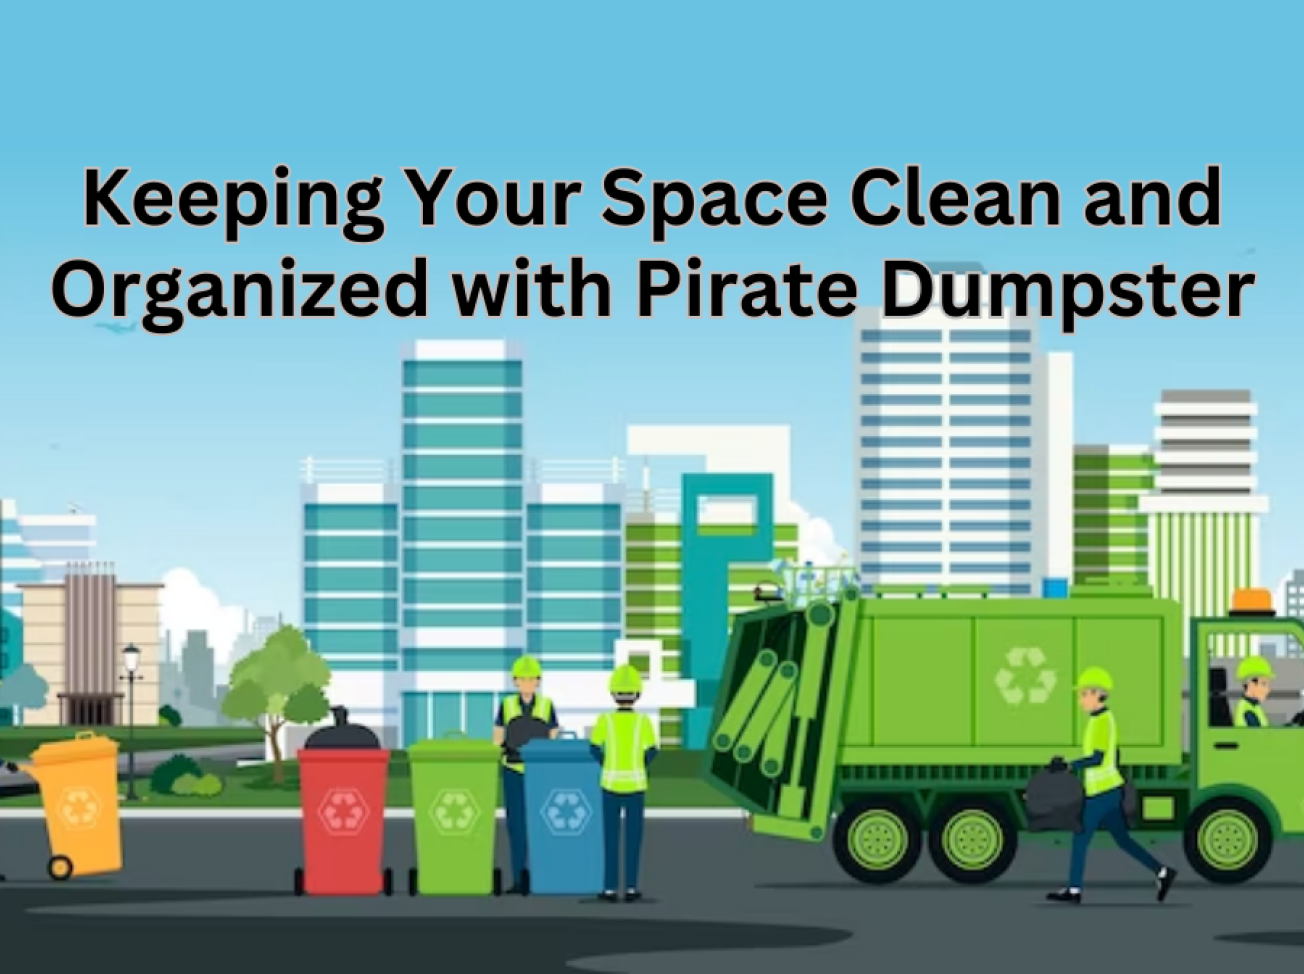 Keeping your space clean and organized with dumpster rental